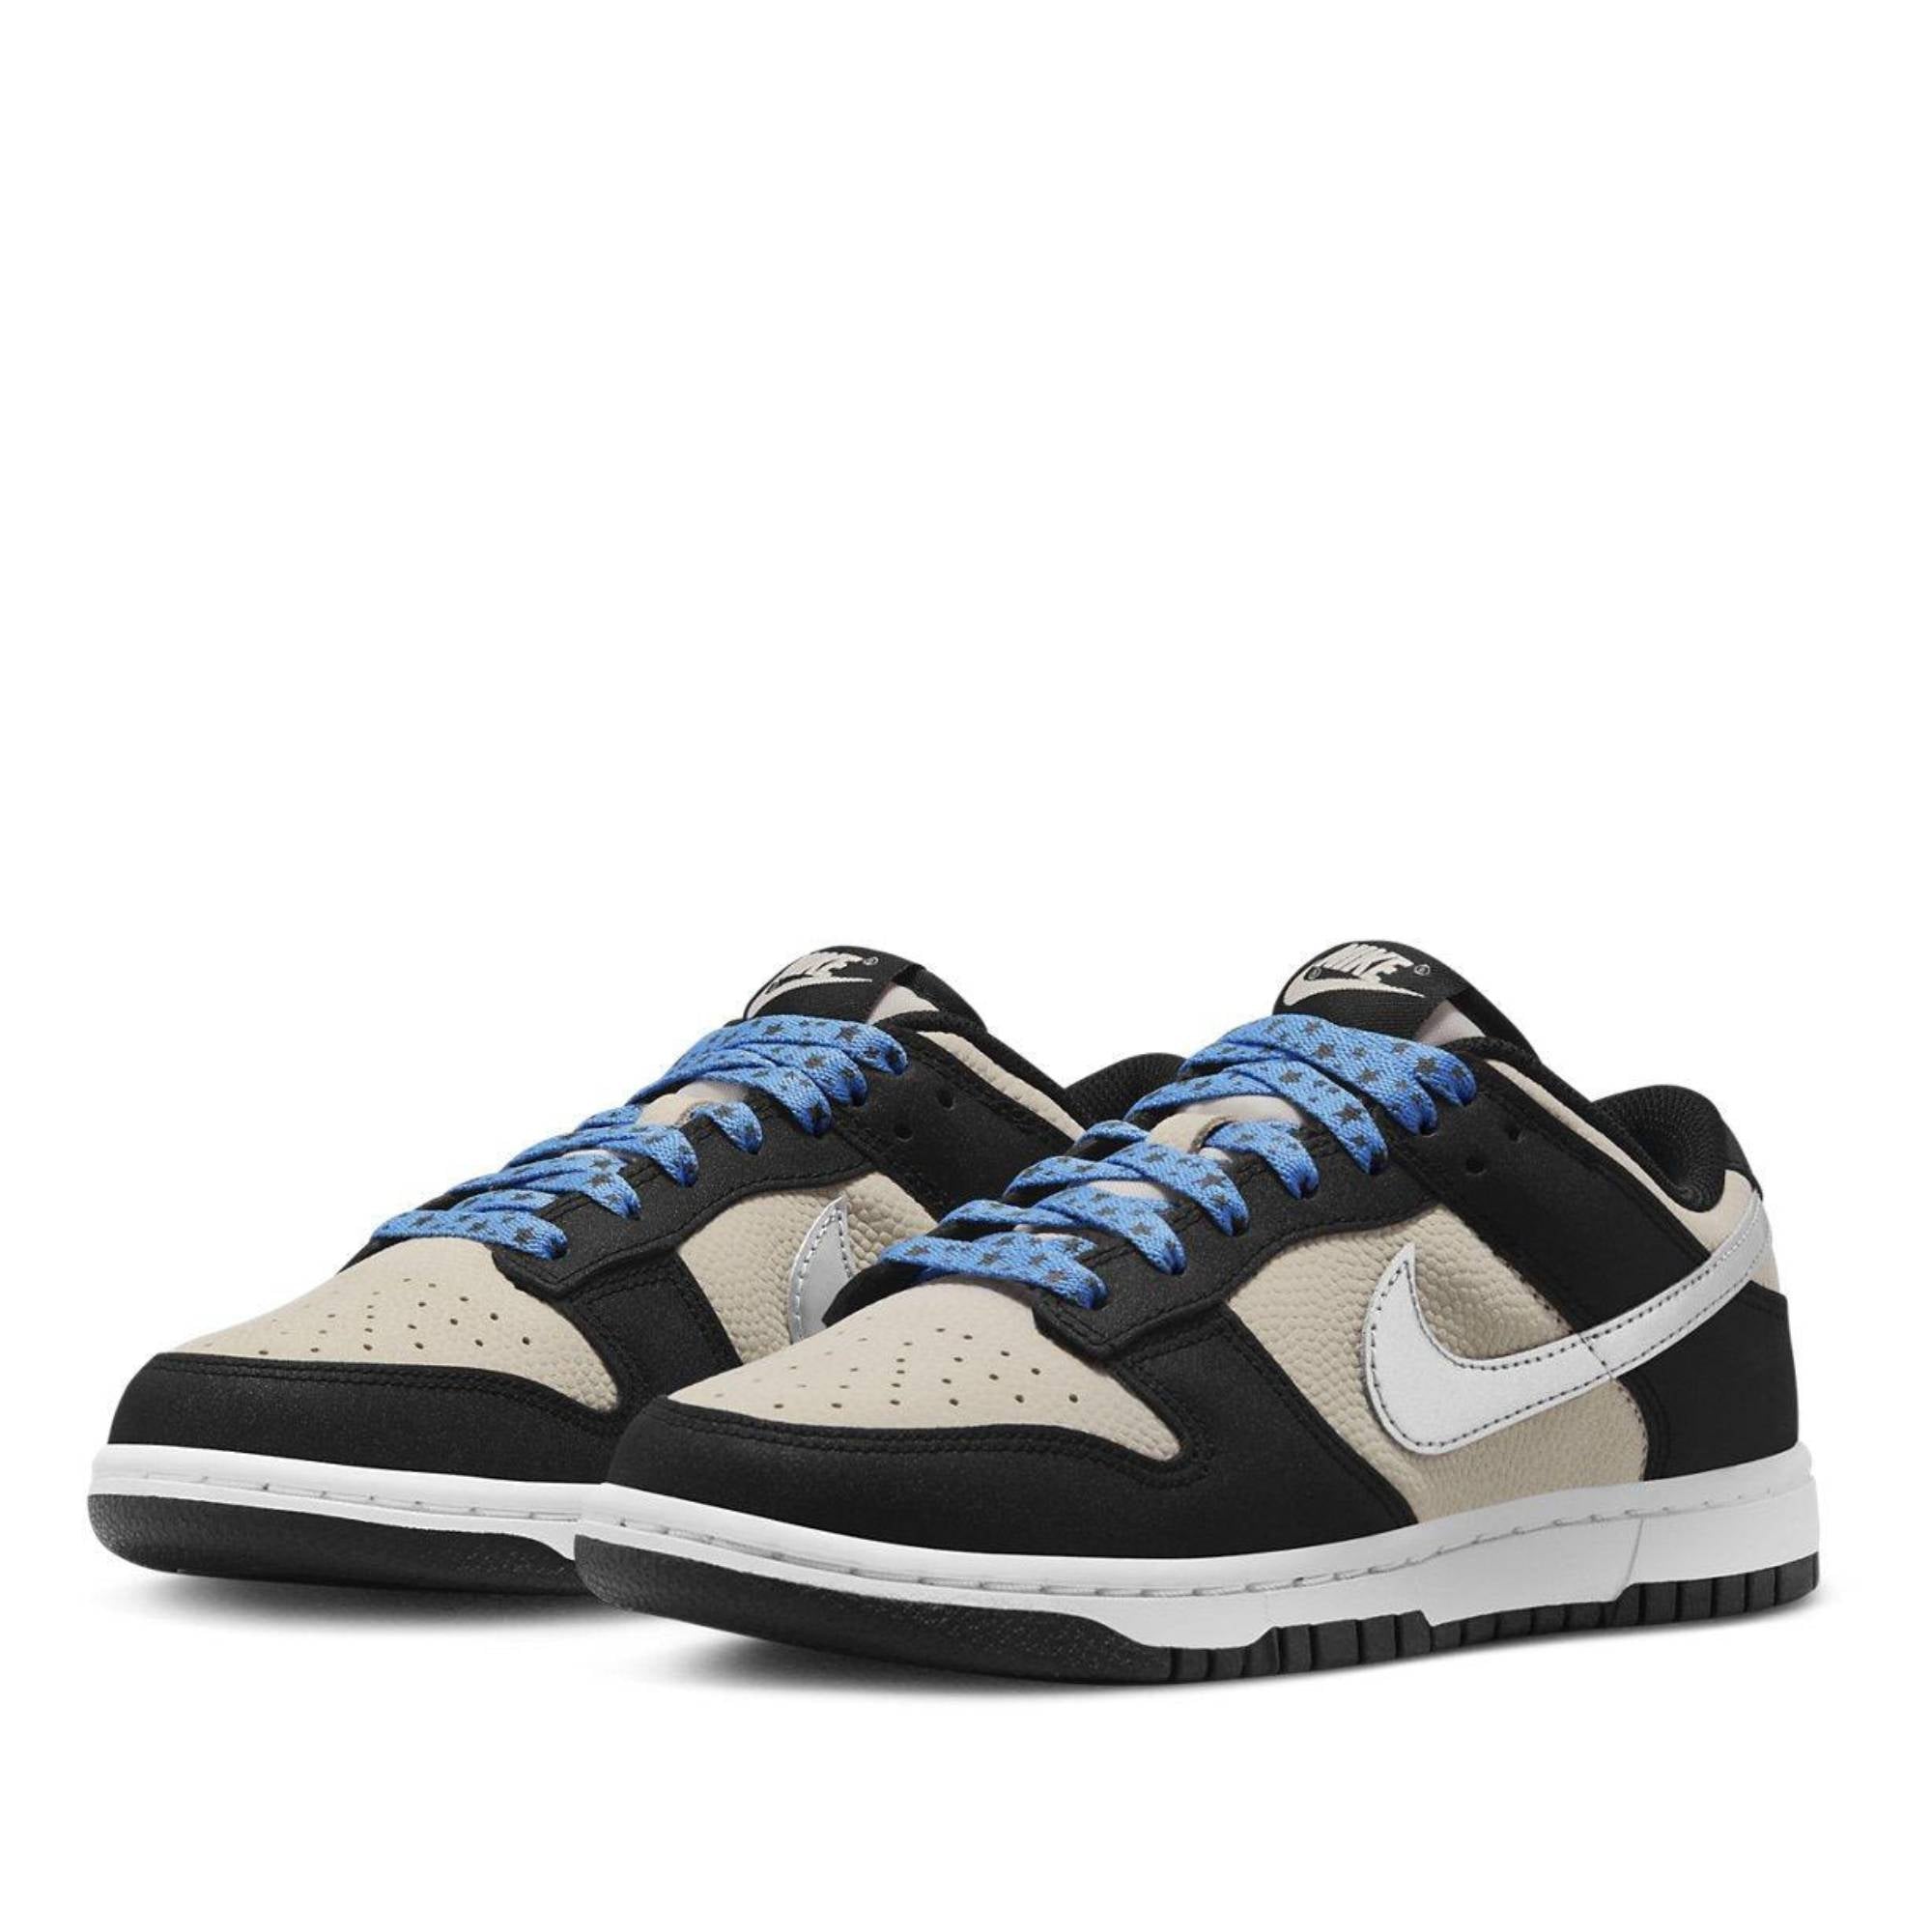 Nike Dunk Low ’Starry Laces’ M Us 7 / W 8.5 Sneakers